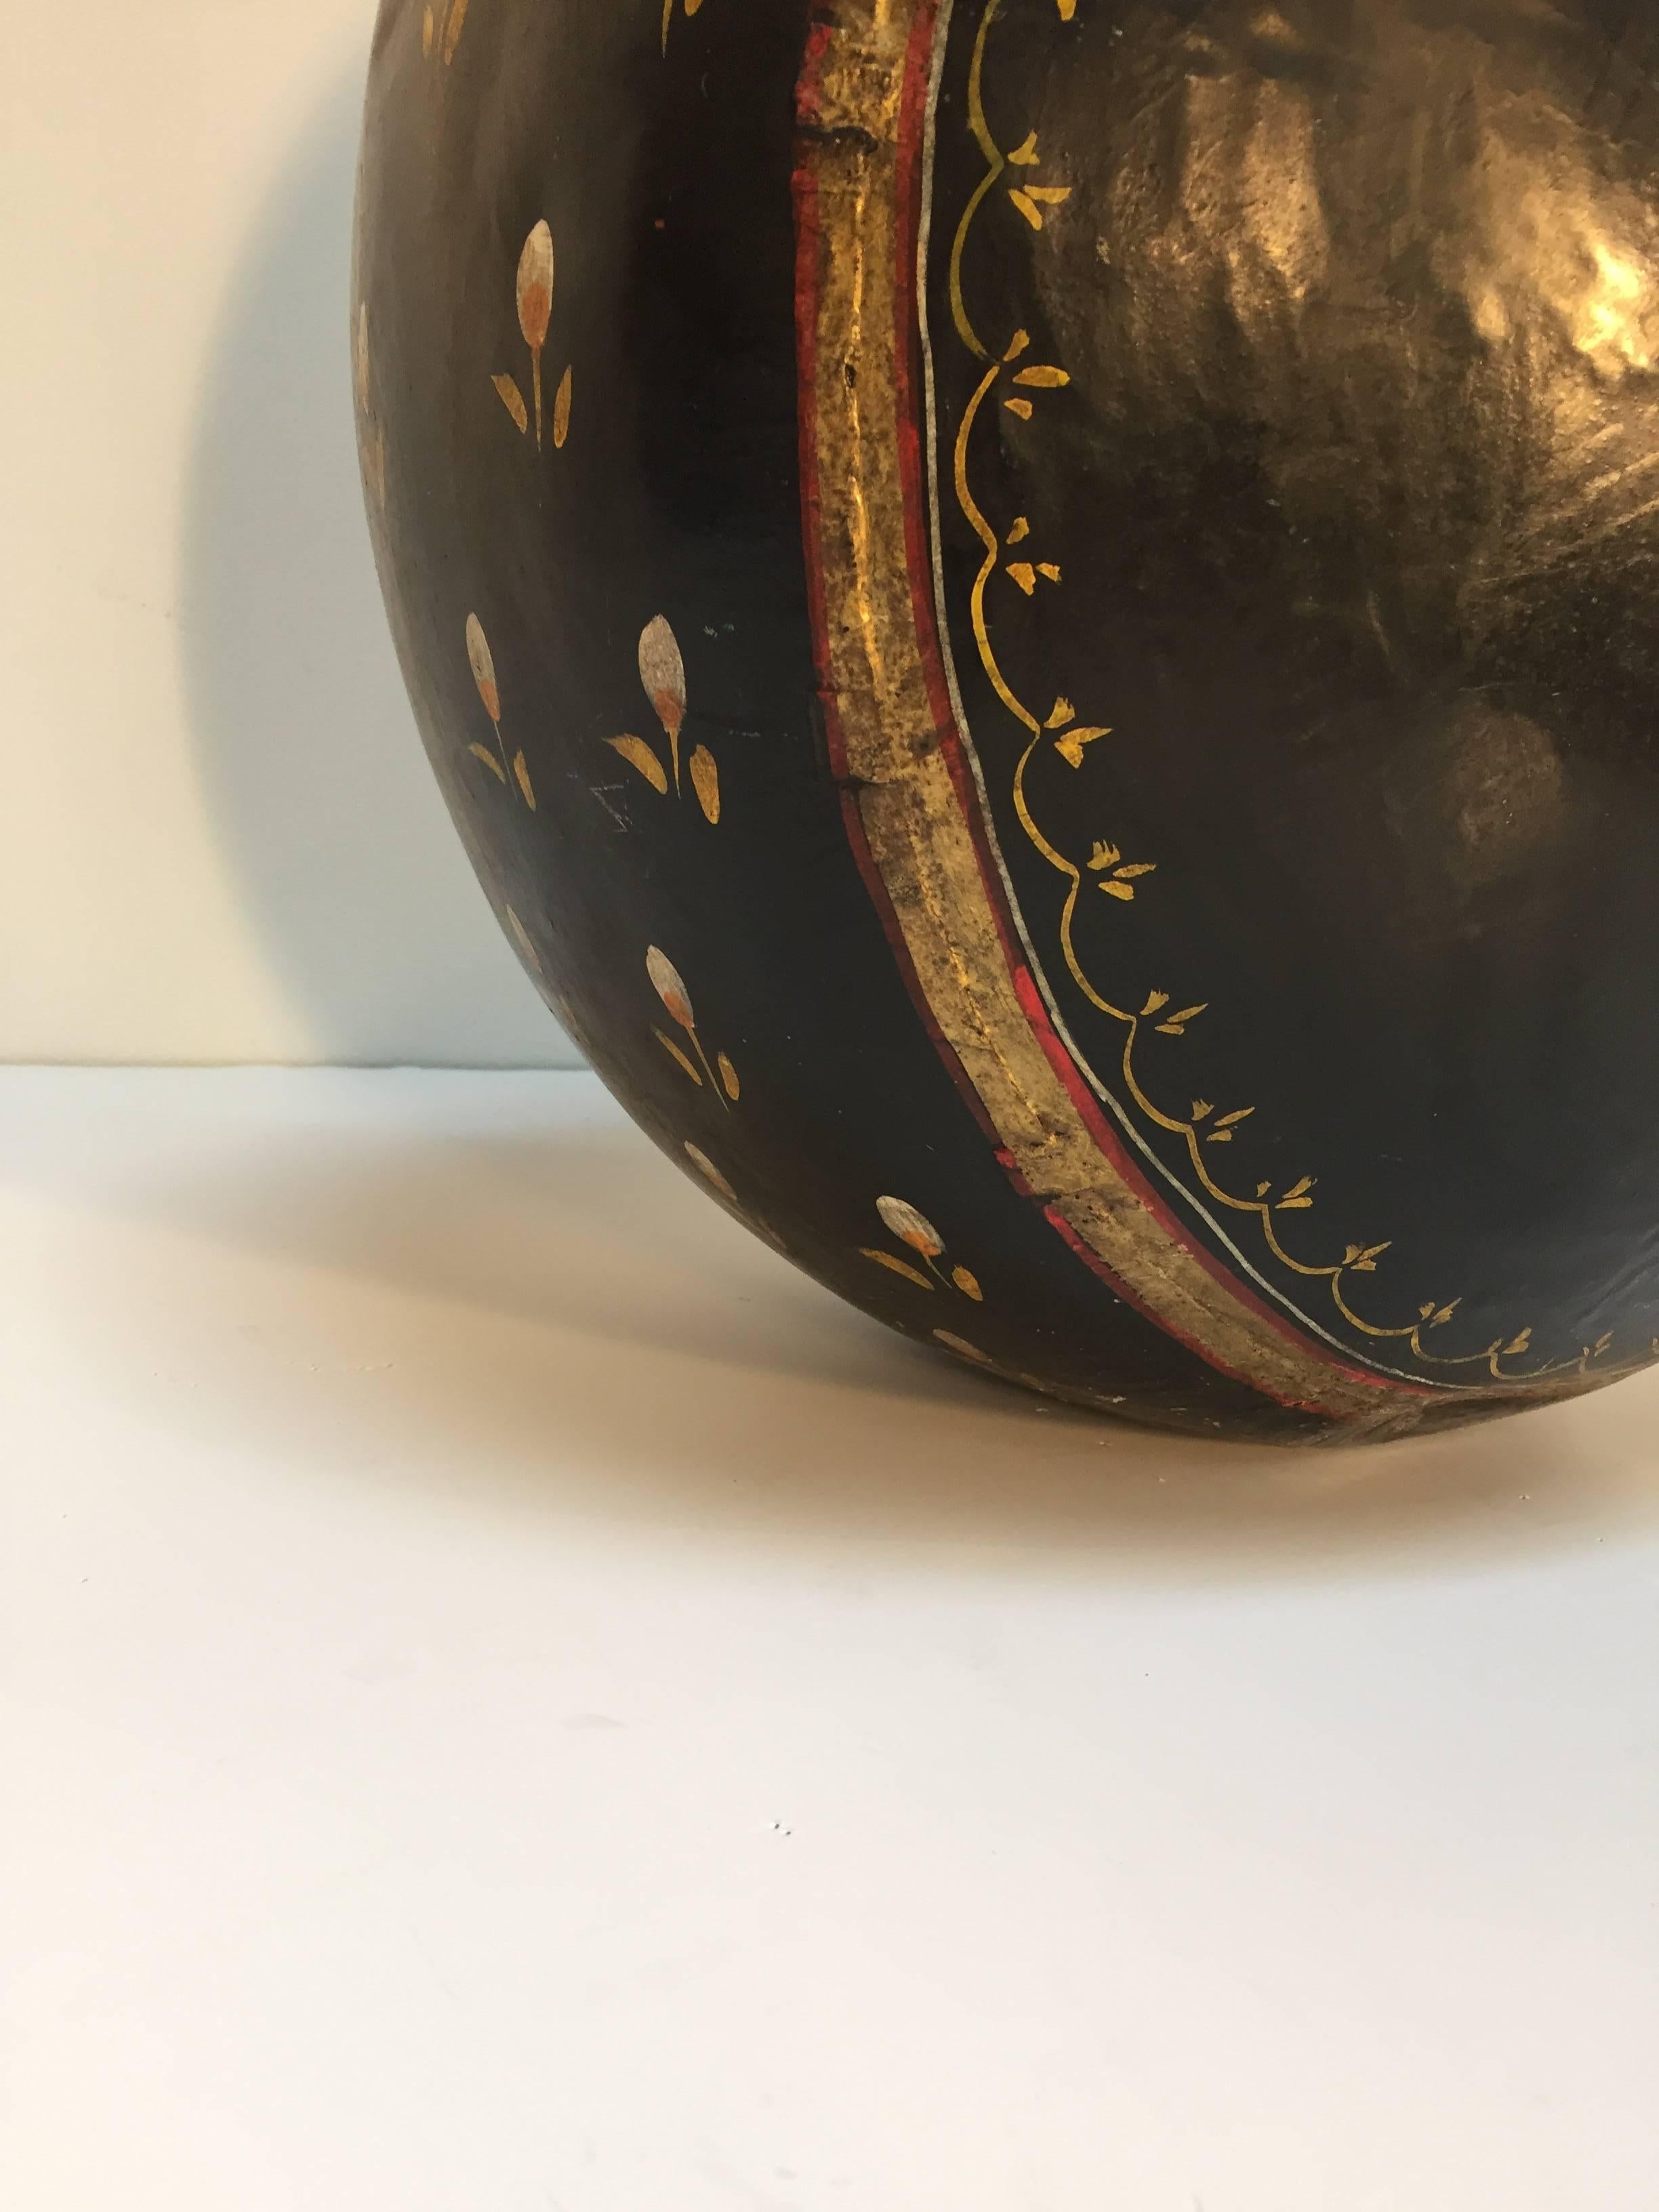 Indo-Raj large hand-hammered metal vessel, originally used to collect waters of the three sacred rivers, the Ganges and Yamuna Sarasvati, this large vessel is much more than just a piece of furniture it tells a story, tradition and handicraft of